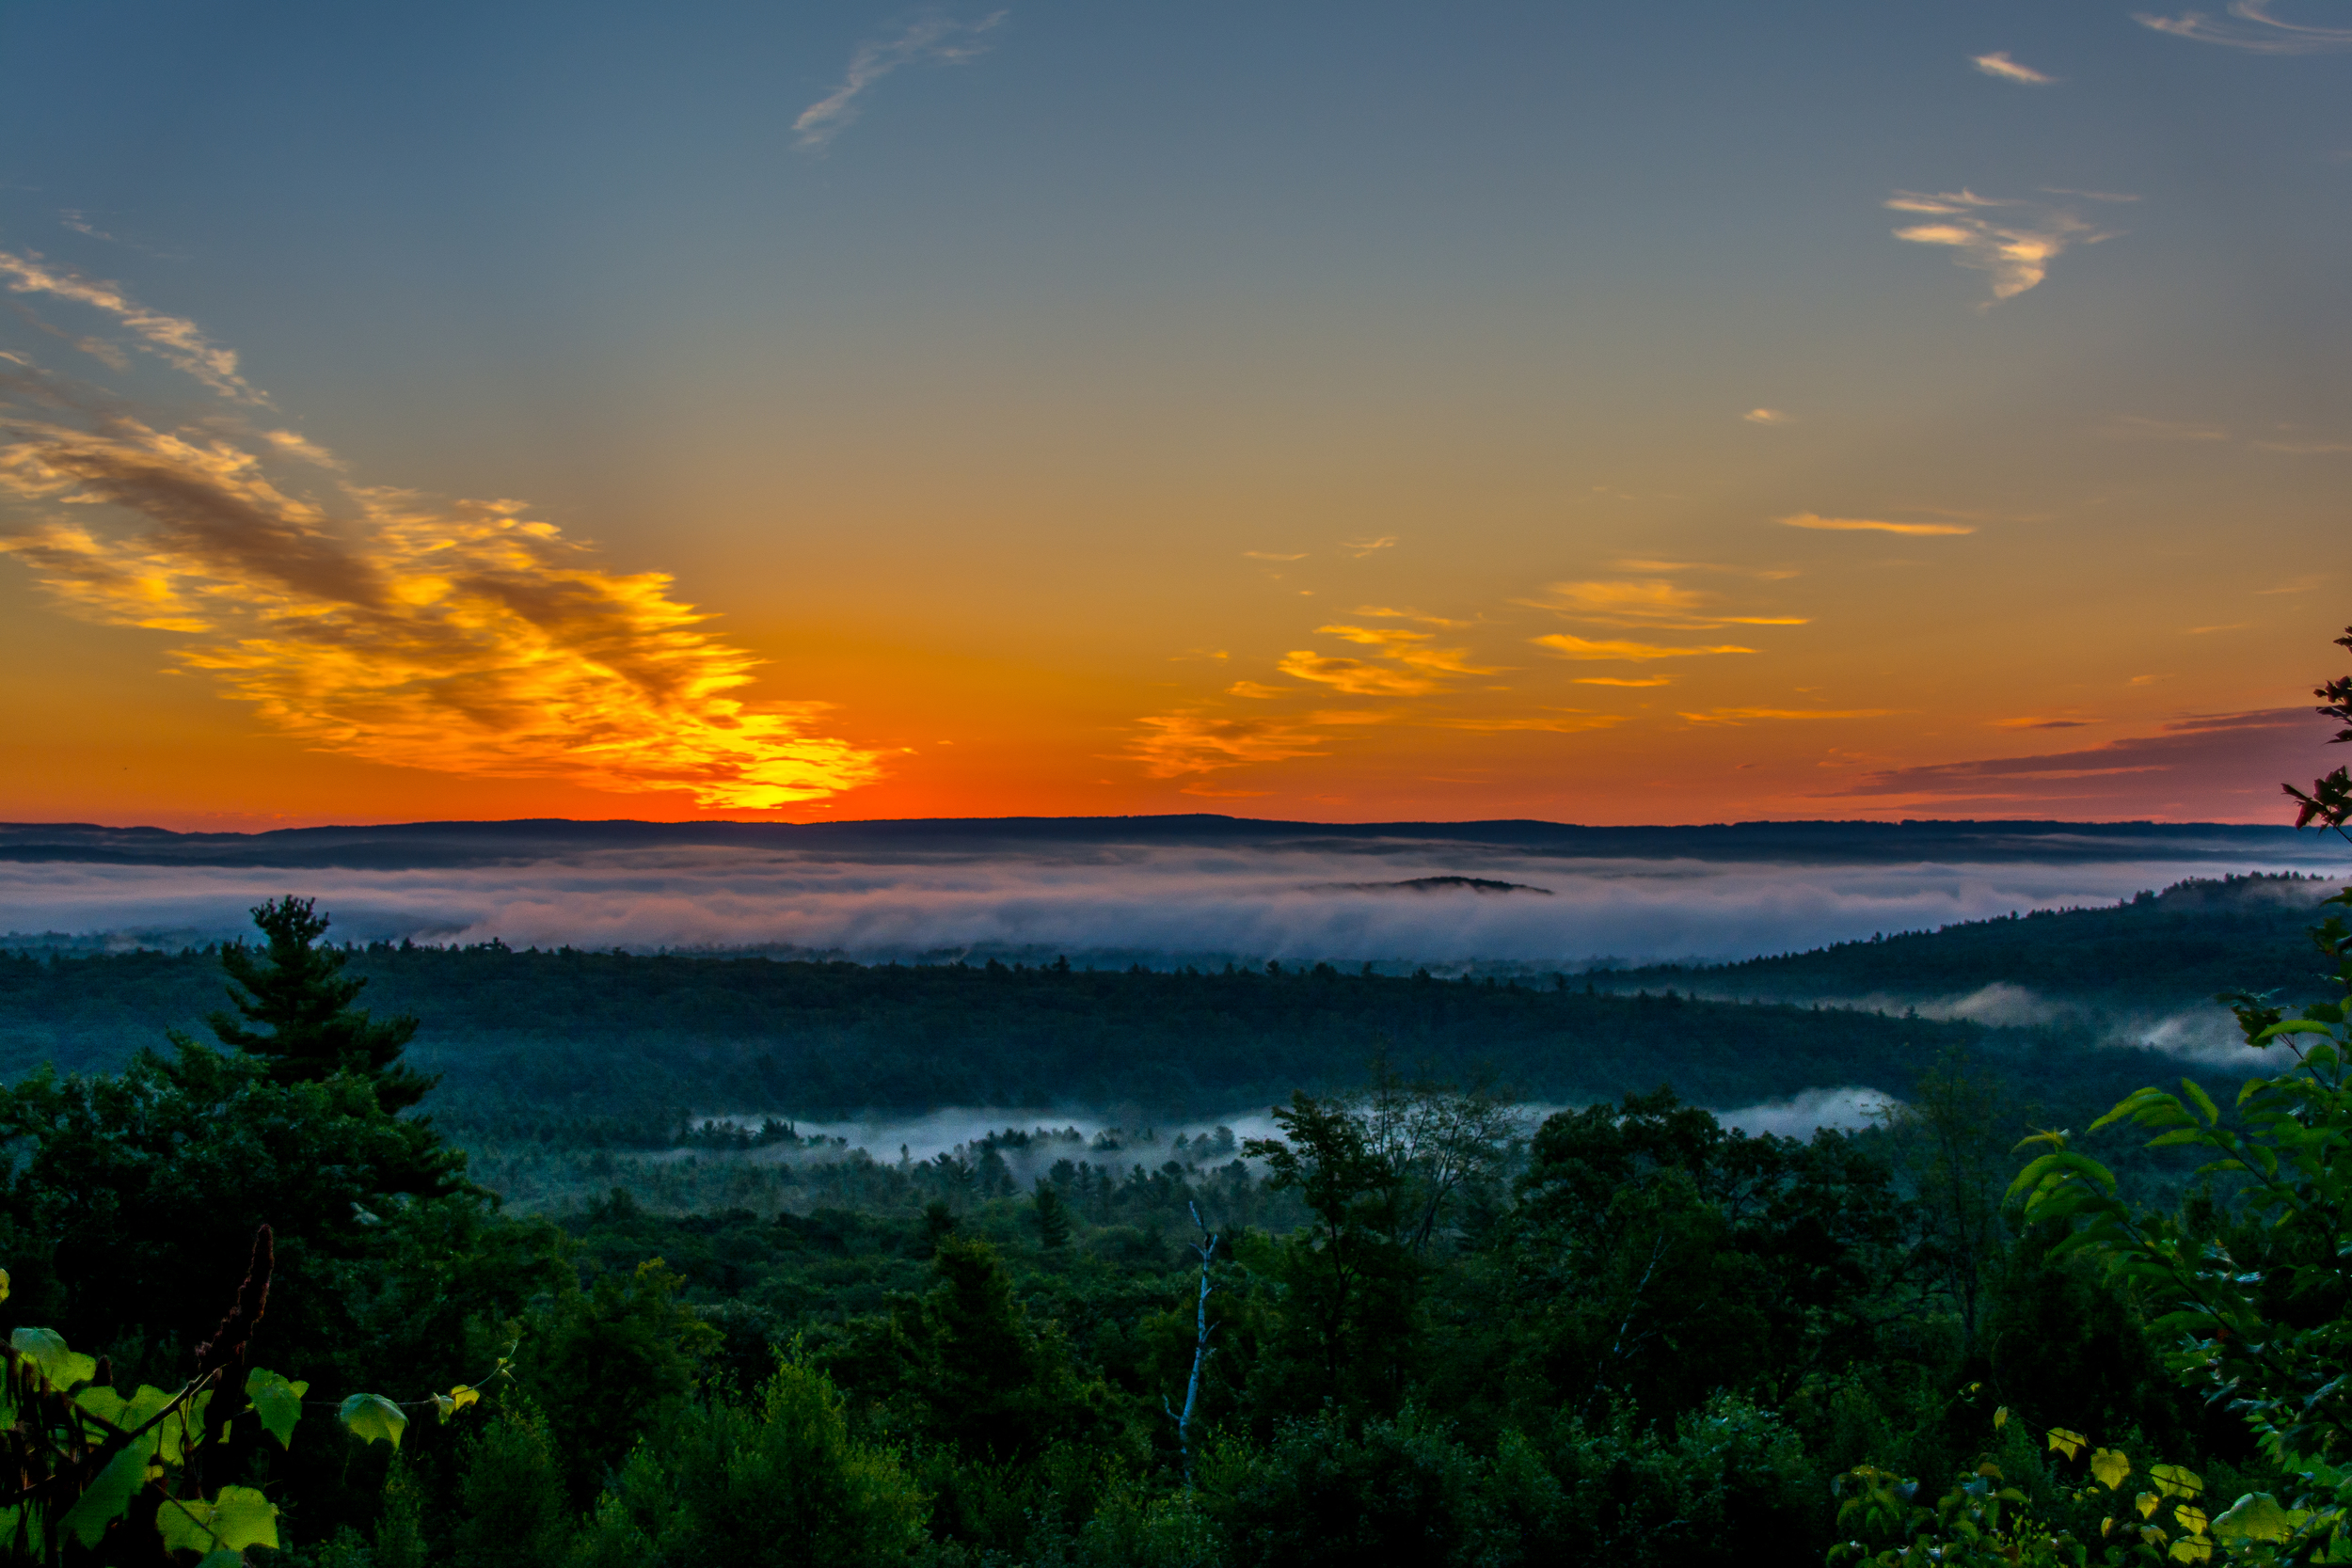 Sunrise from the Quabbin lookout in New Salem on RT 202.  8/5/15 